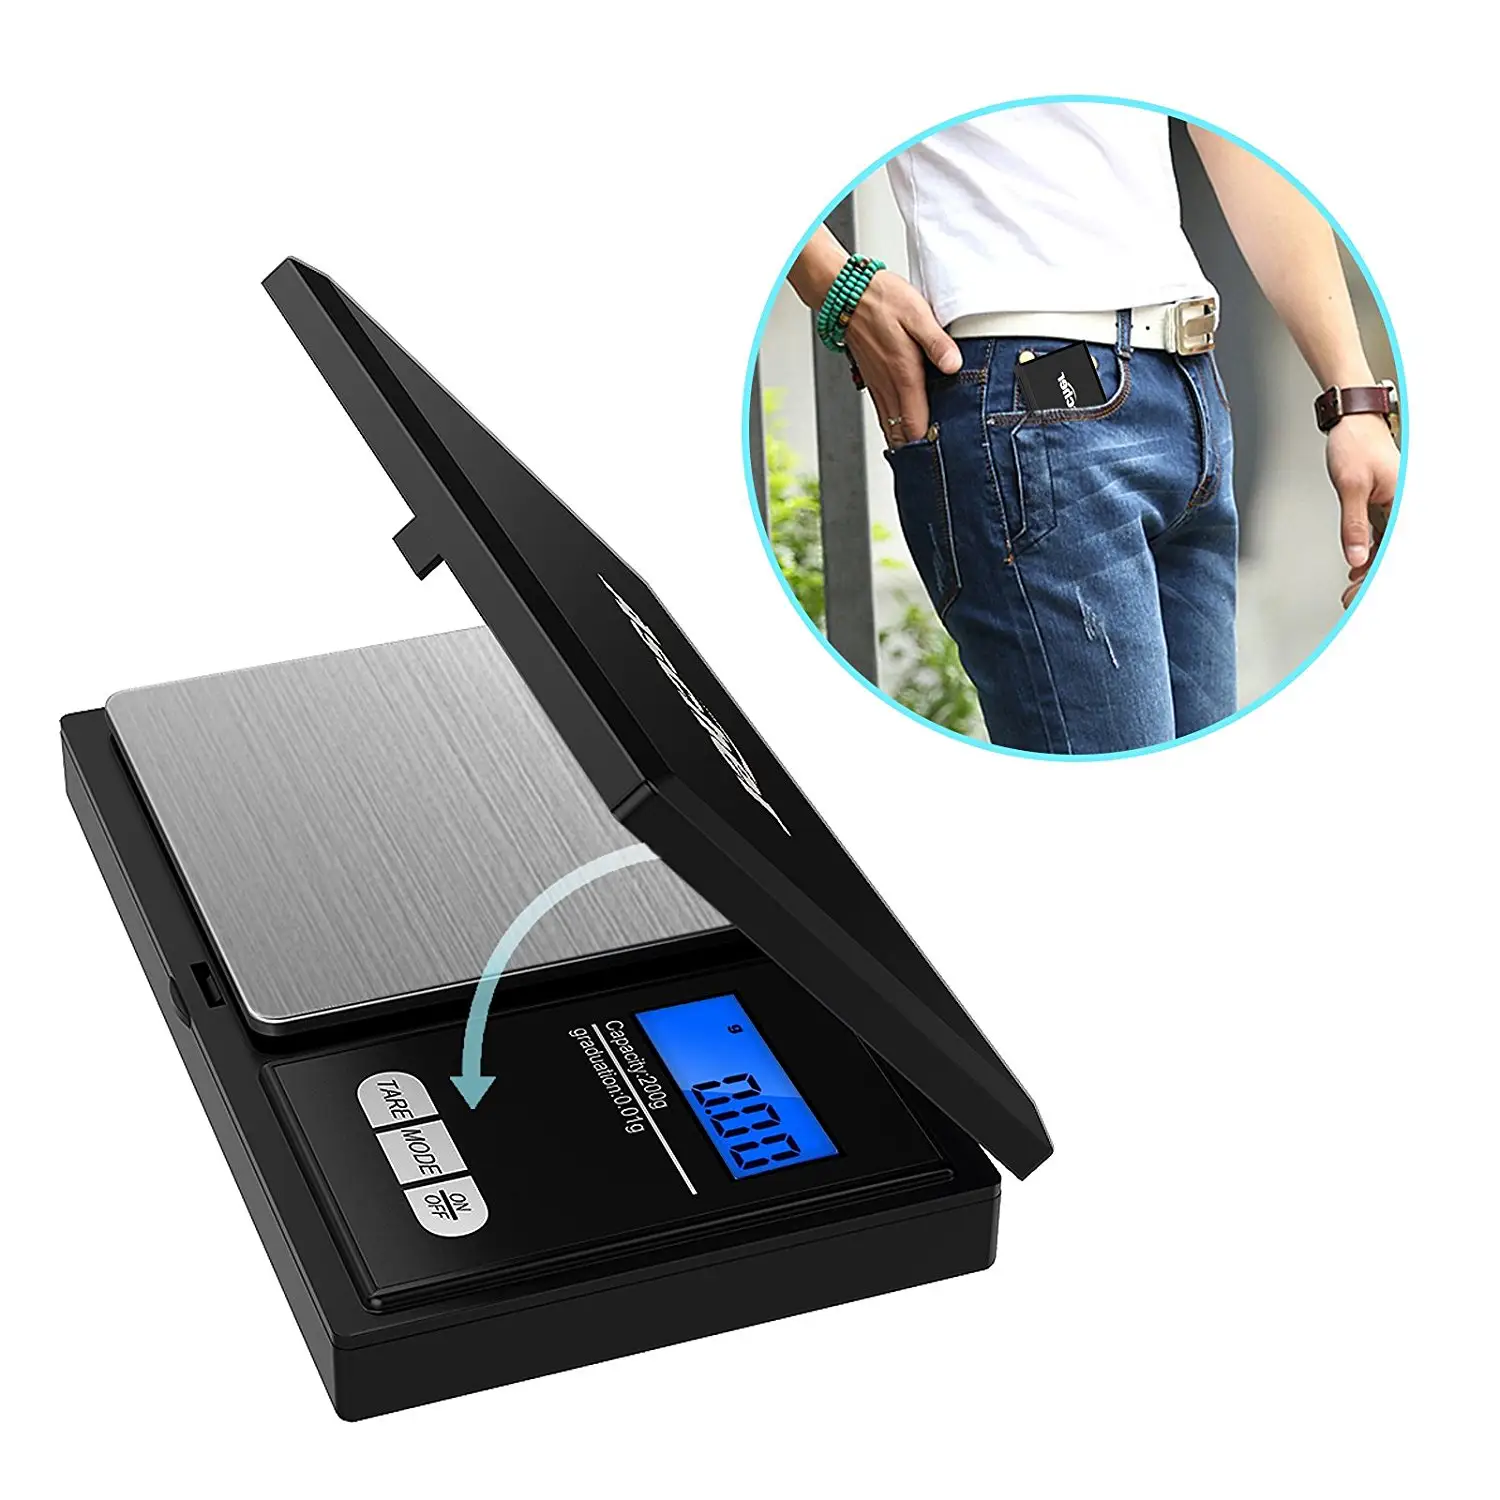 Hot Selling Mini 0.01 Show Screen Weighing Scale Electronic Balance Gram Digital Pocket scale Jewelry Diamond Scale